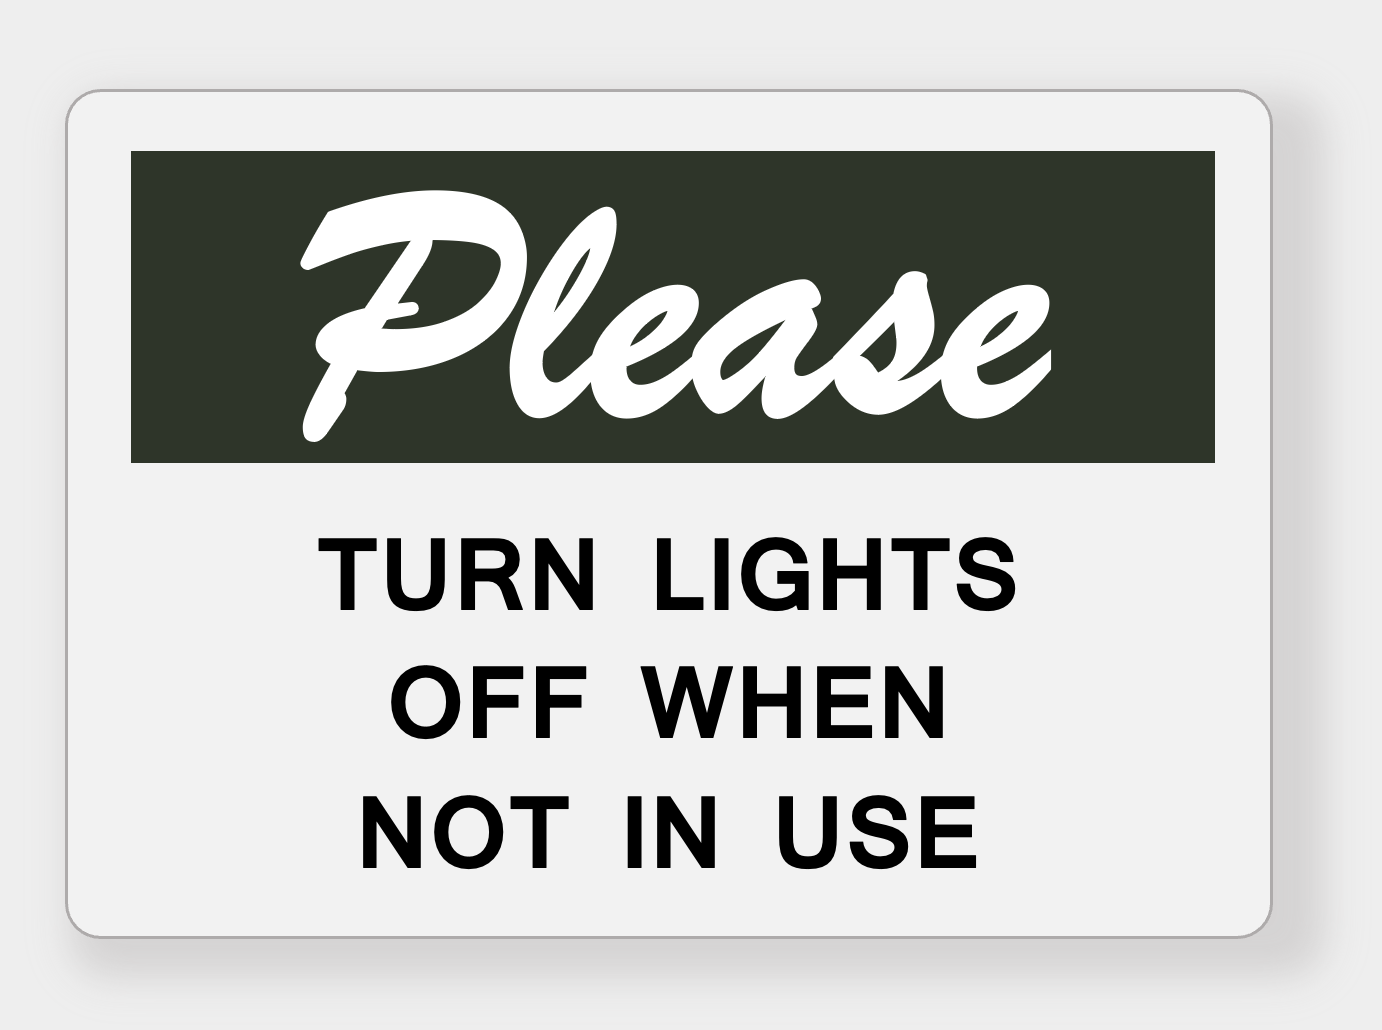 Sign reading "Please turn lights off when not in use"